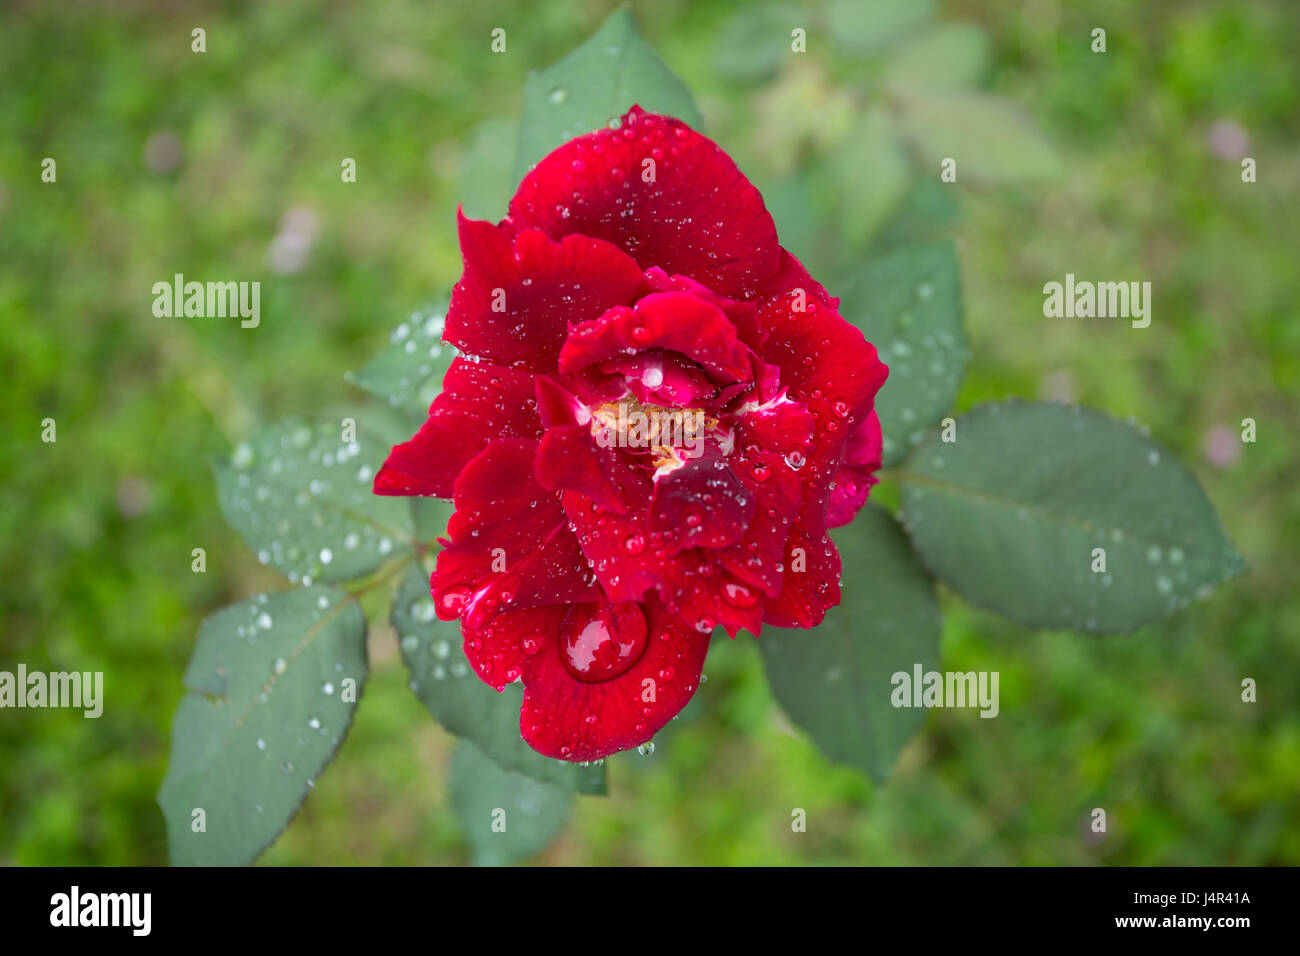 Raindrops pepper the red rose flower's petals and leaves, is seen during rainy morning in Asuncion, Paraguay. Stock Photo